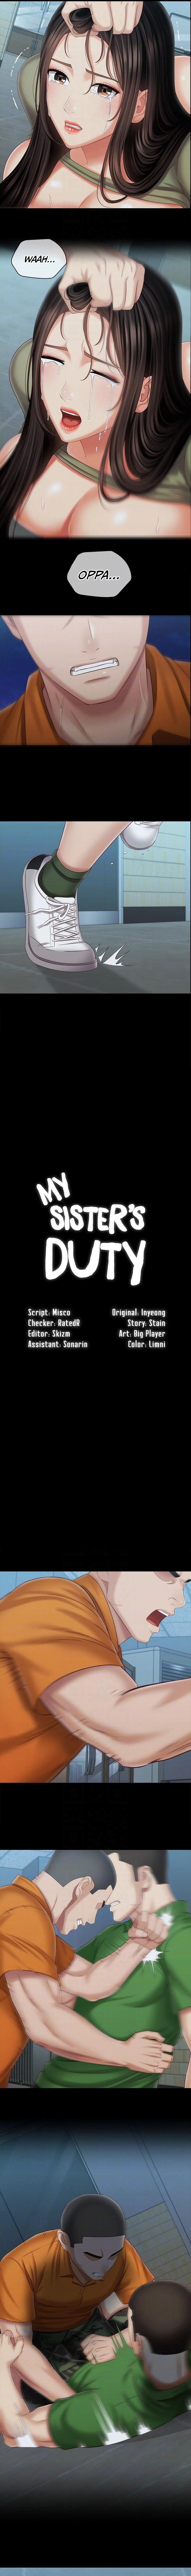 My Sister’s Duty image